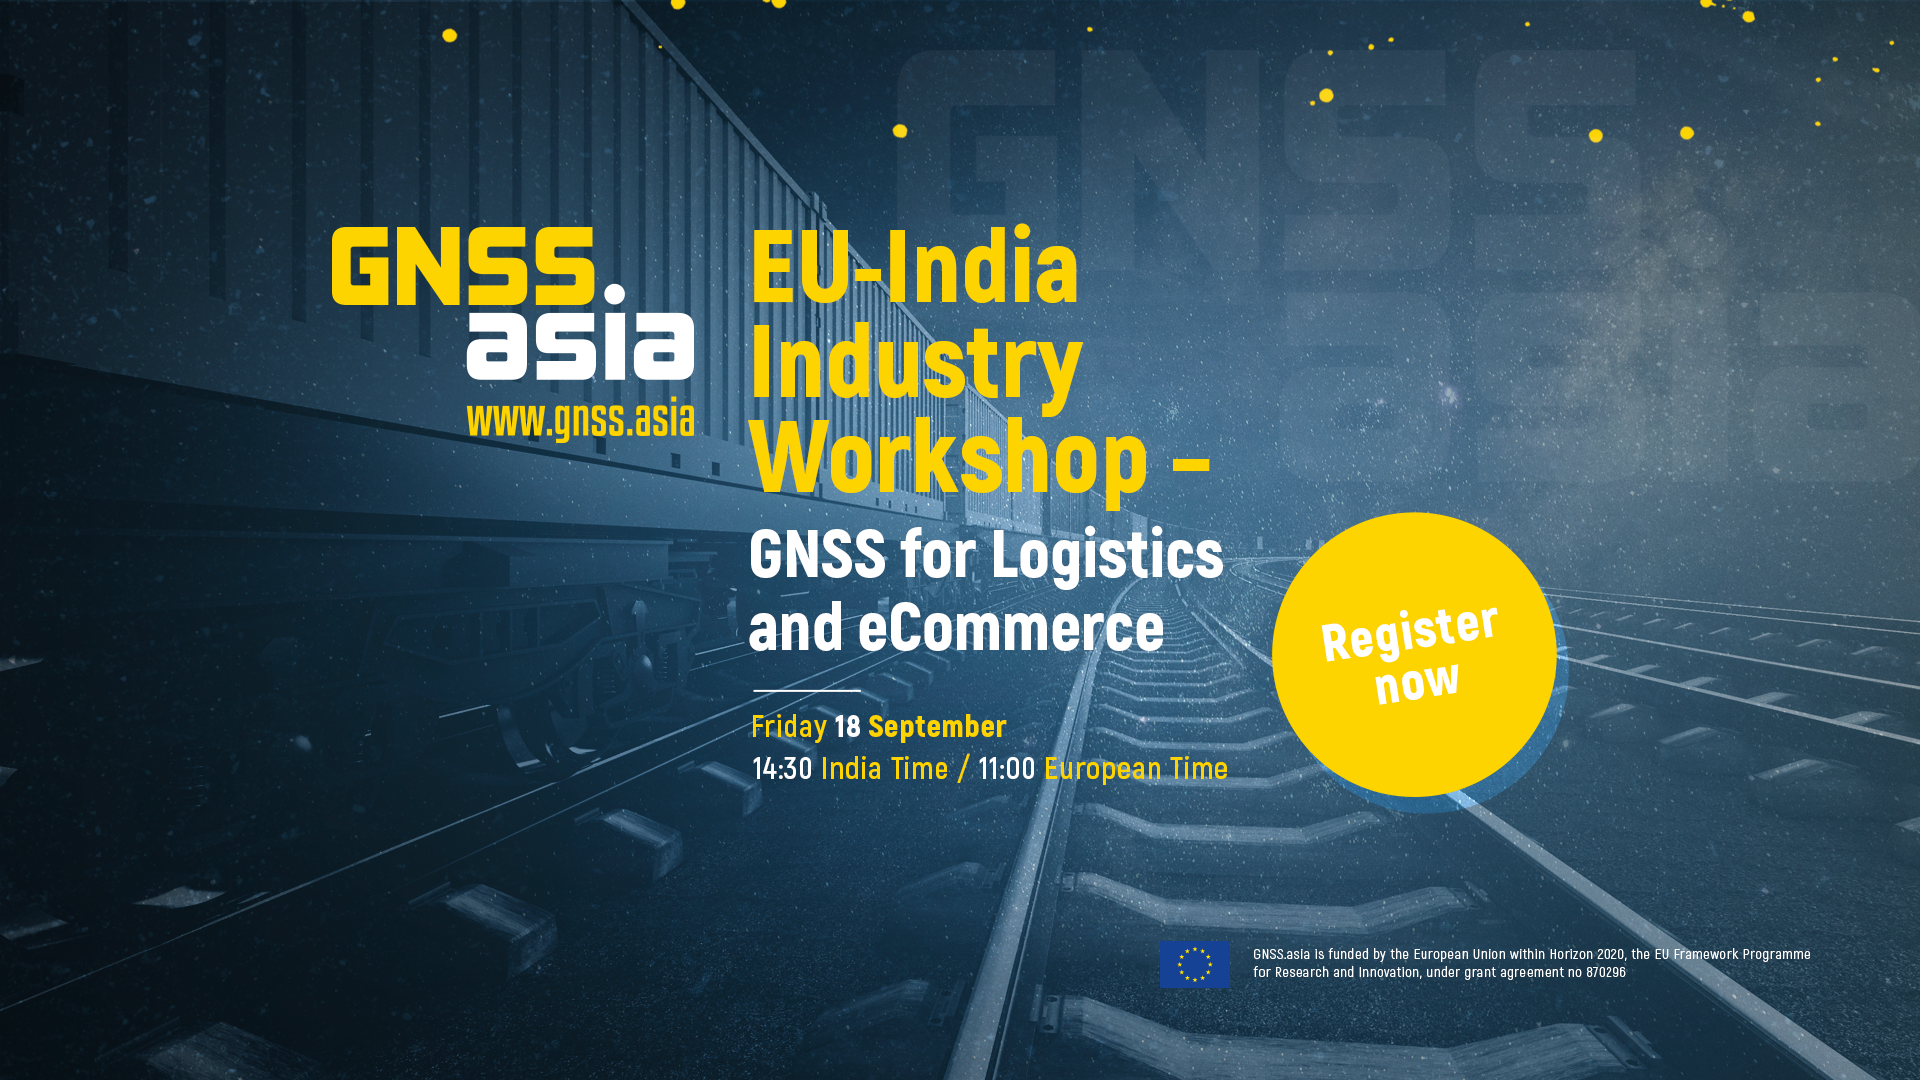 Save the date – EU-India Online Workshop on GNSS for Logistics & eCommerce on 18 September